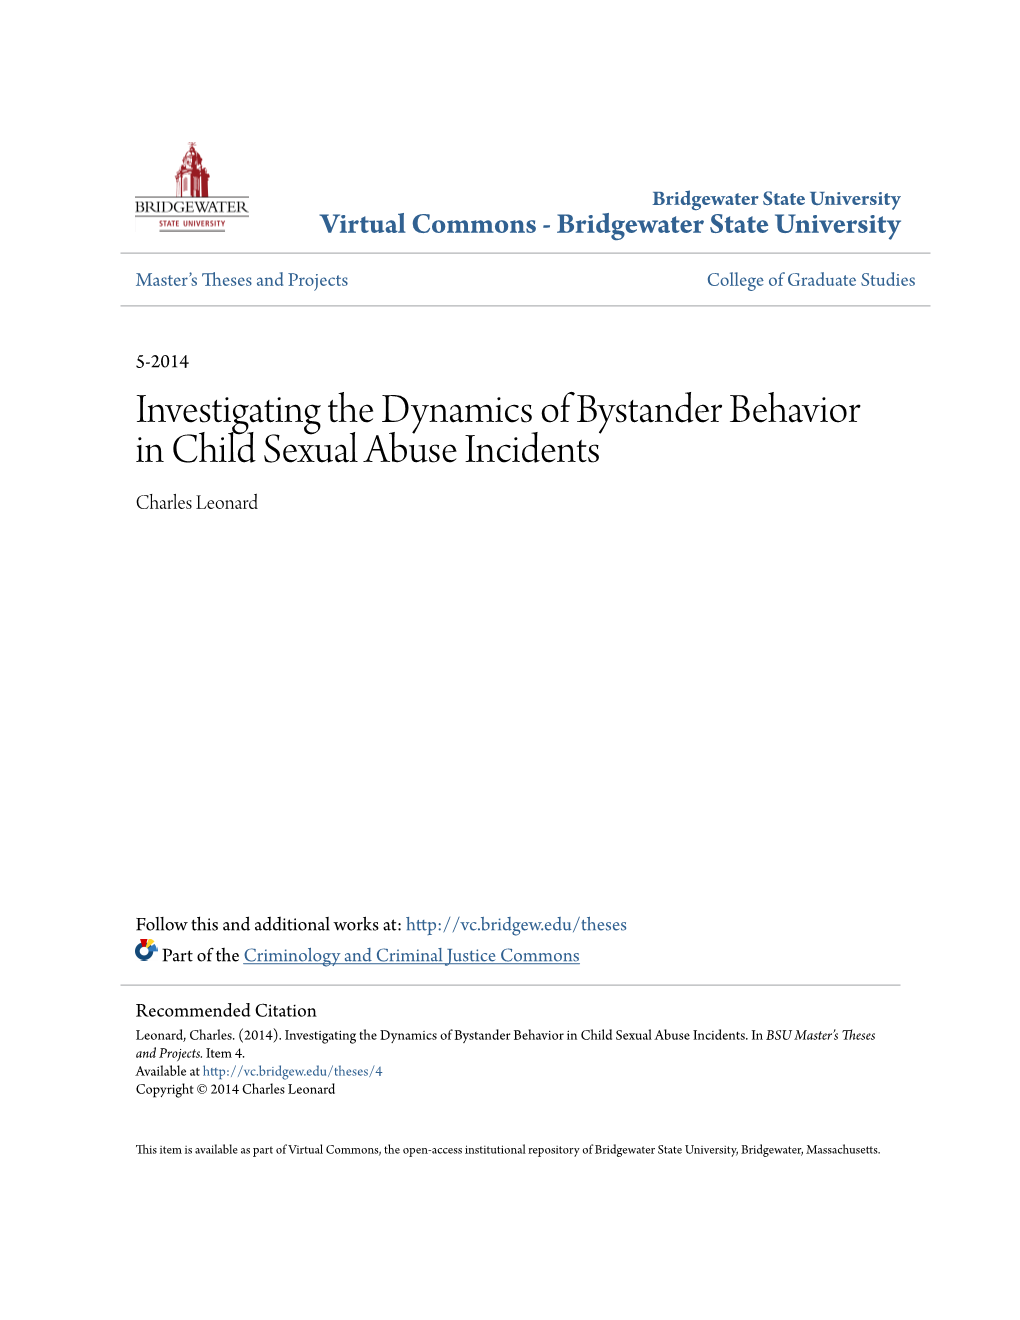 Investigating the Dynamics of Bystander Behavior in Child Sexual Abuse Incidents Charles Leonard